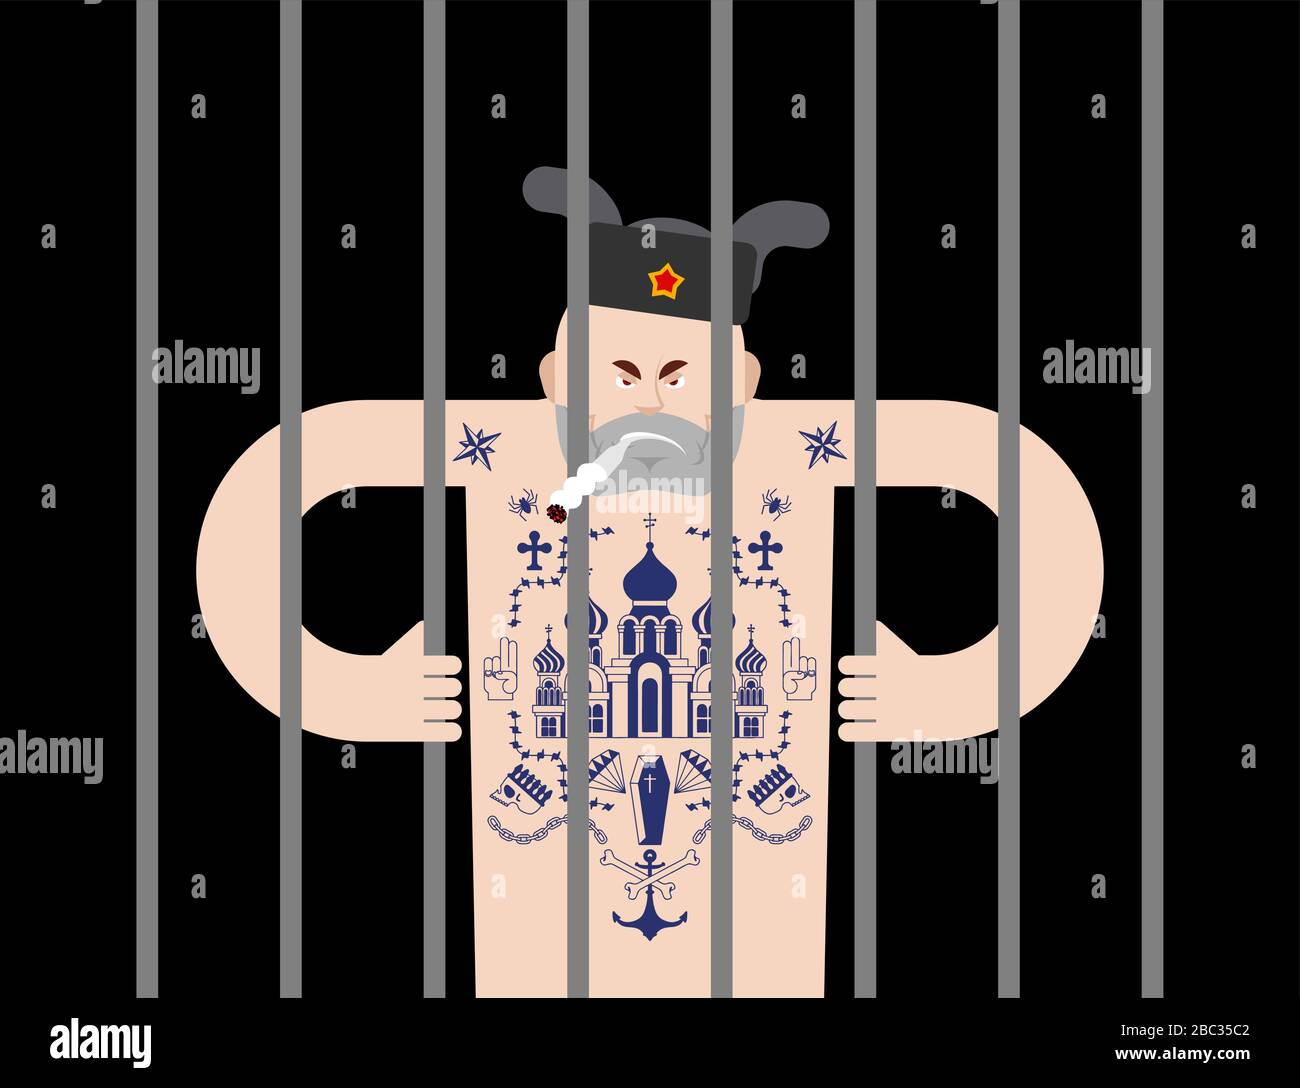 Russian prisoner with tattoo. Russia criminal guy mafia tattooing. Church and skull. Cross and chain. Barbed wire and crown. Thief stars. Stock Vector